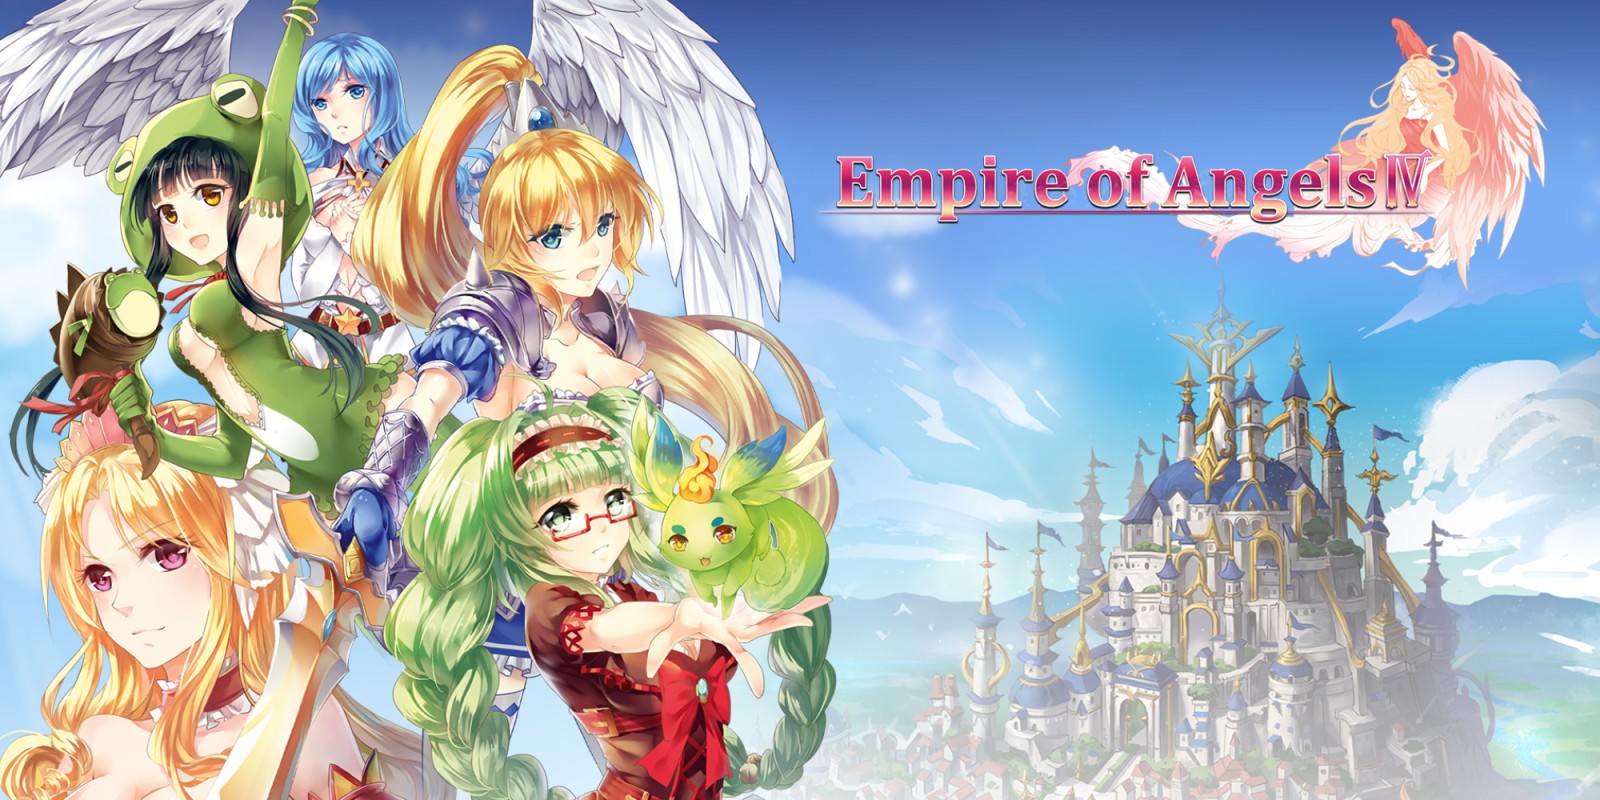 Empire of Angels IV